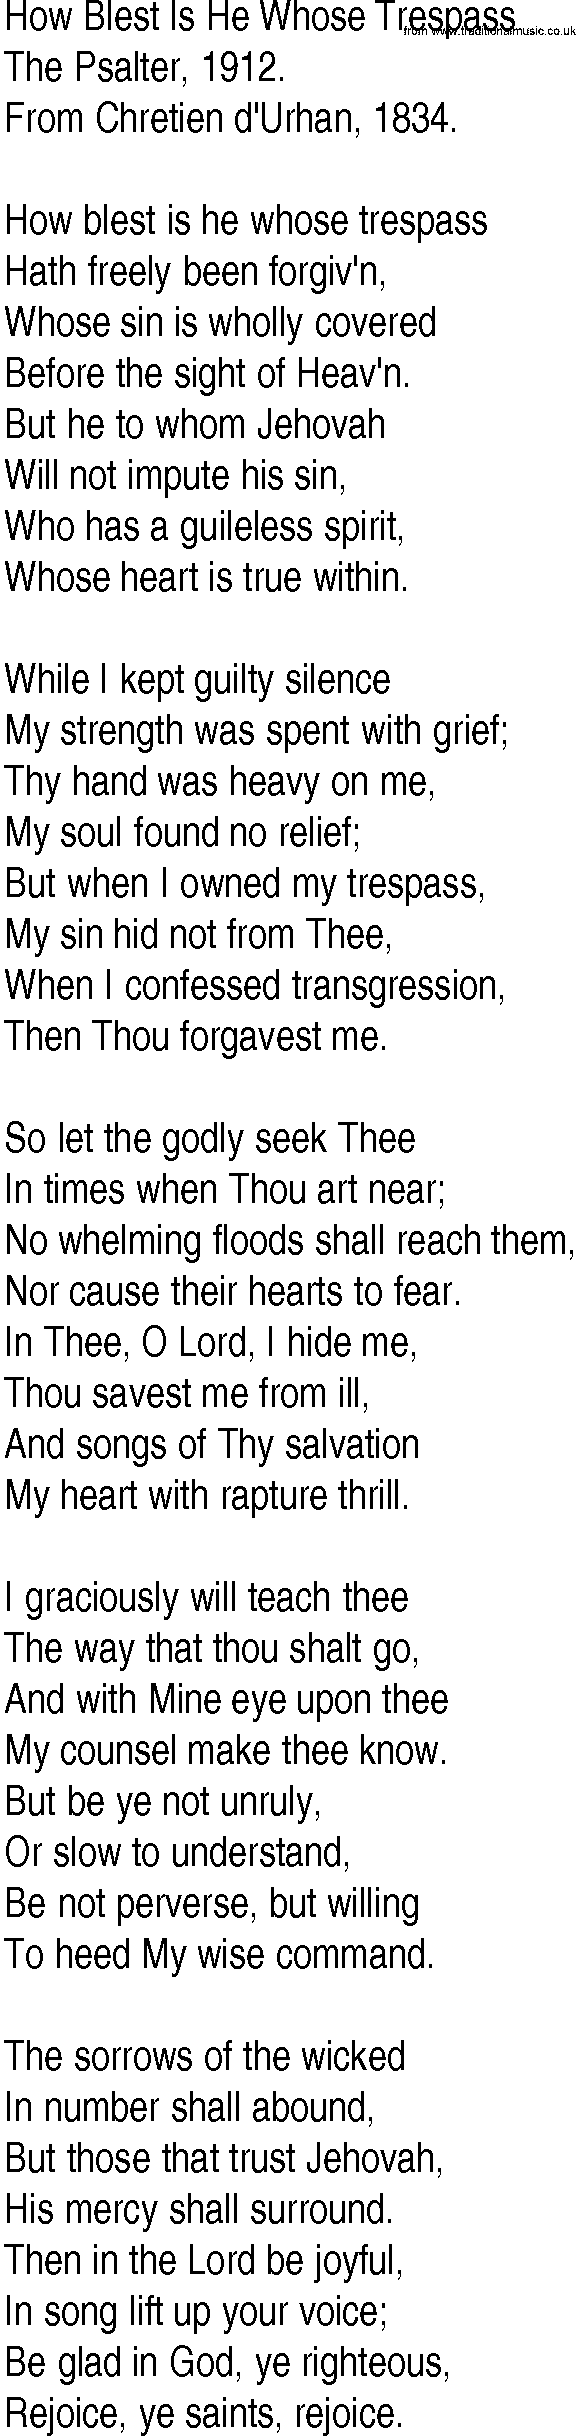 Hymn and Gospel Song: How Blest Is He Whose Trespass by The Psalter lyrics